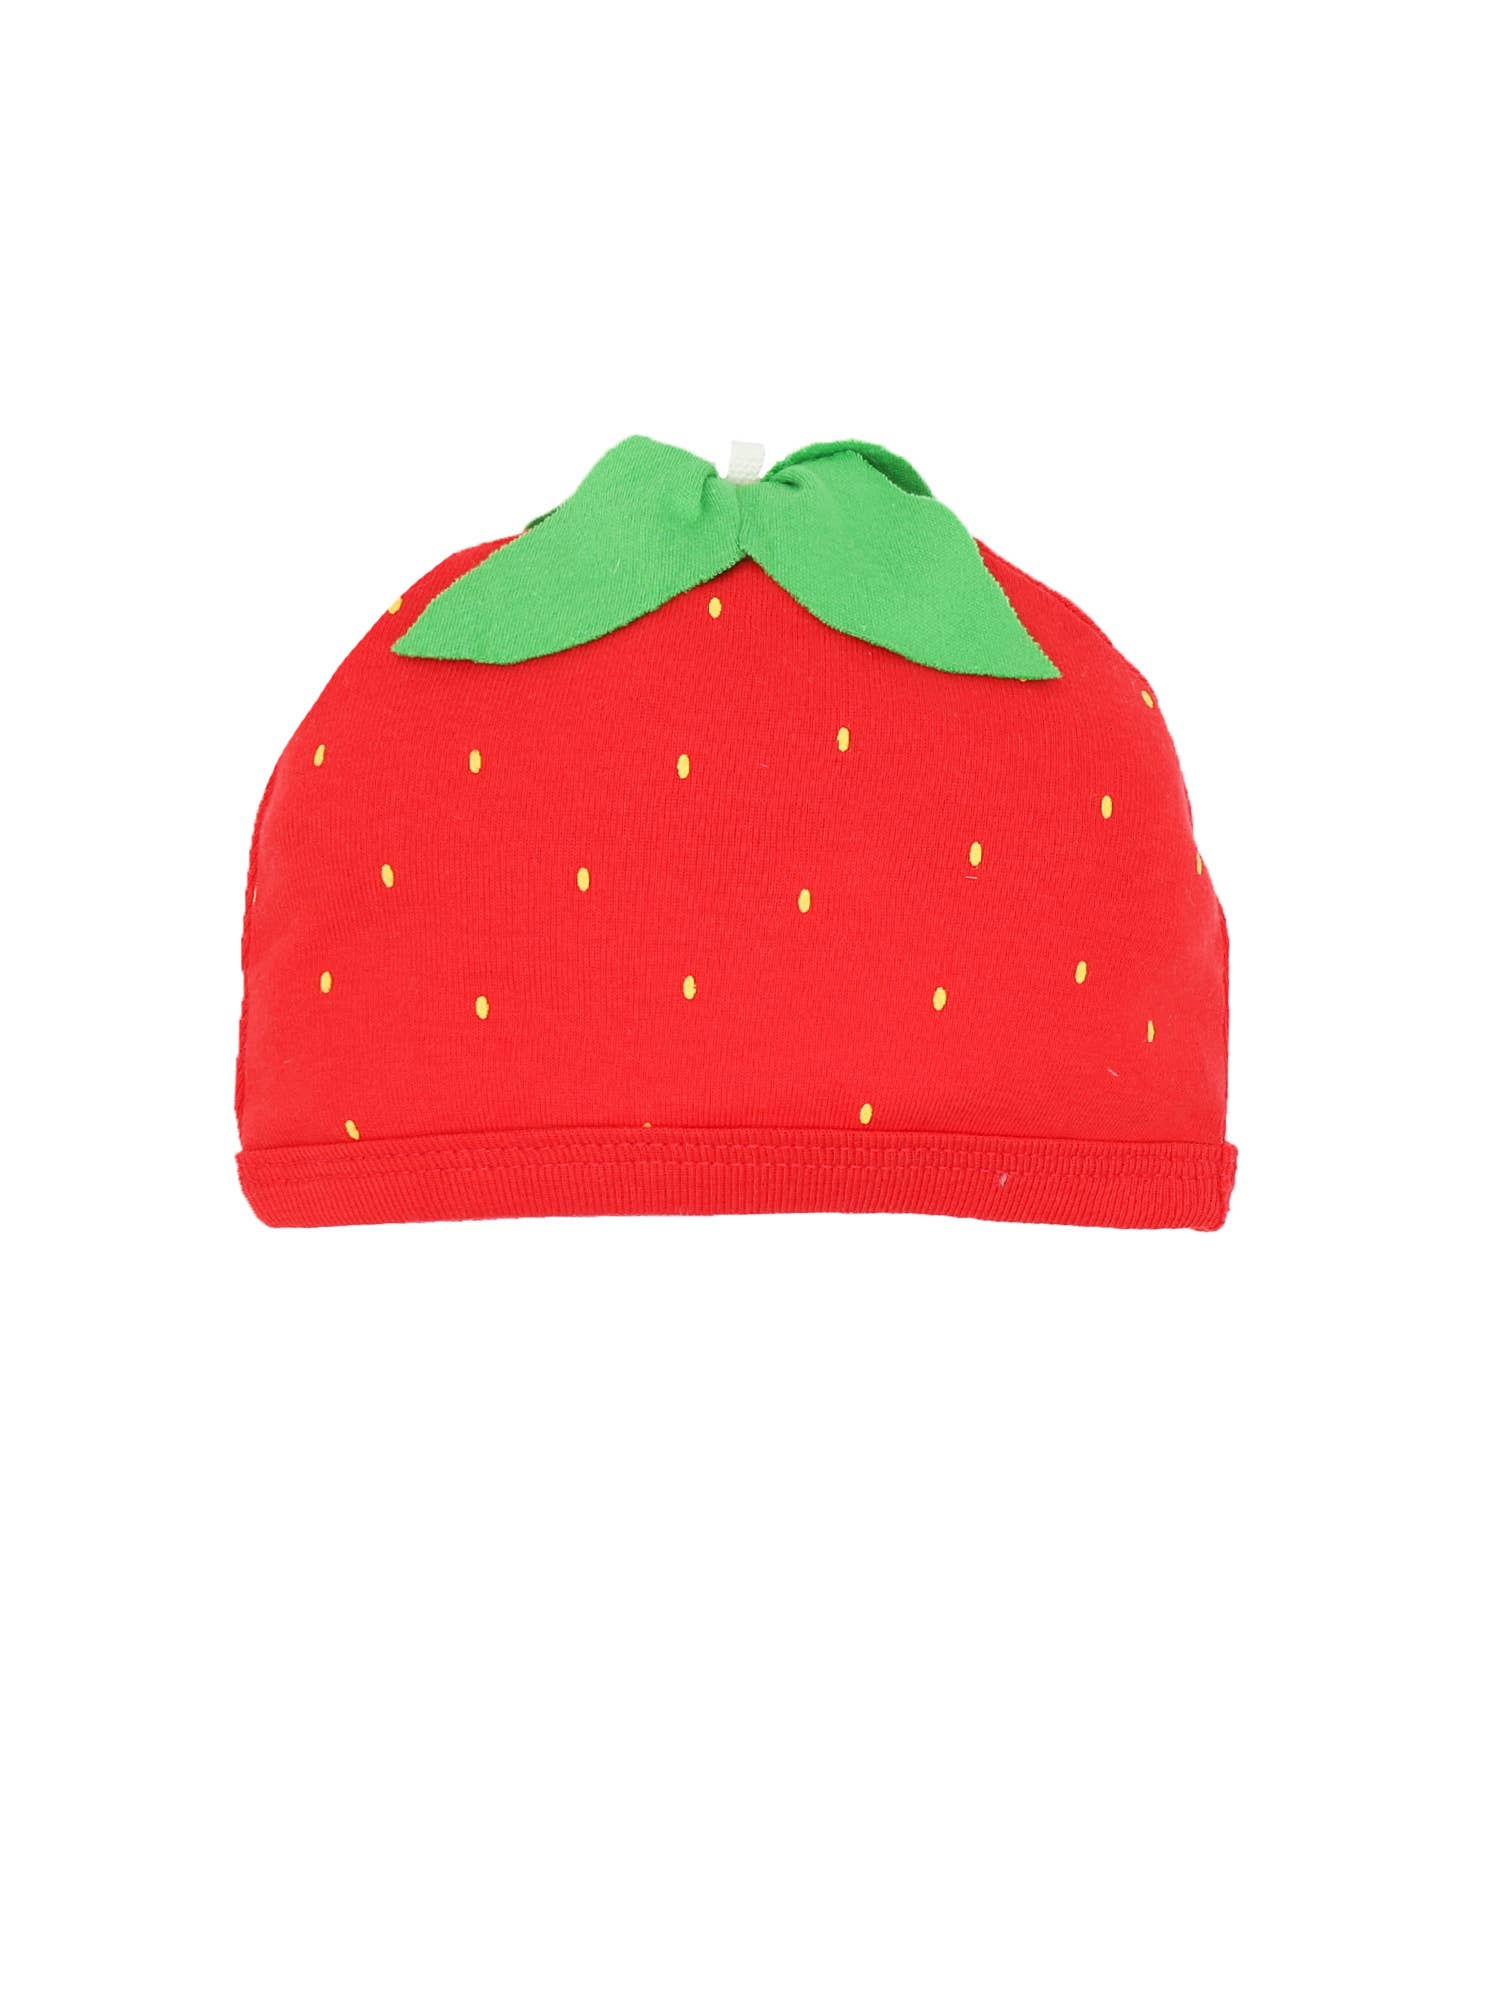 Strawberry Baby Beanie - Organic Boutique